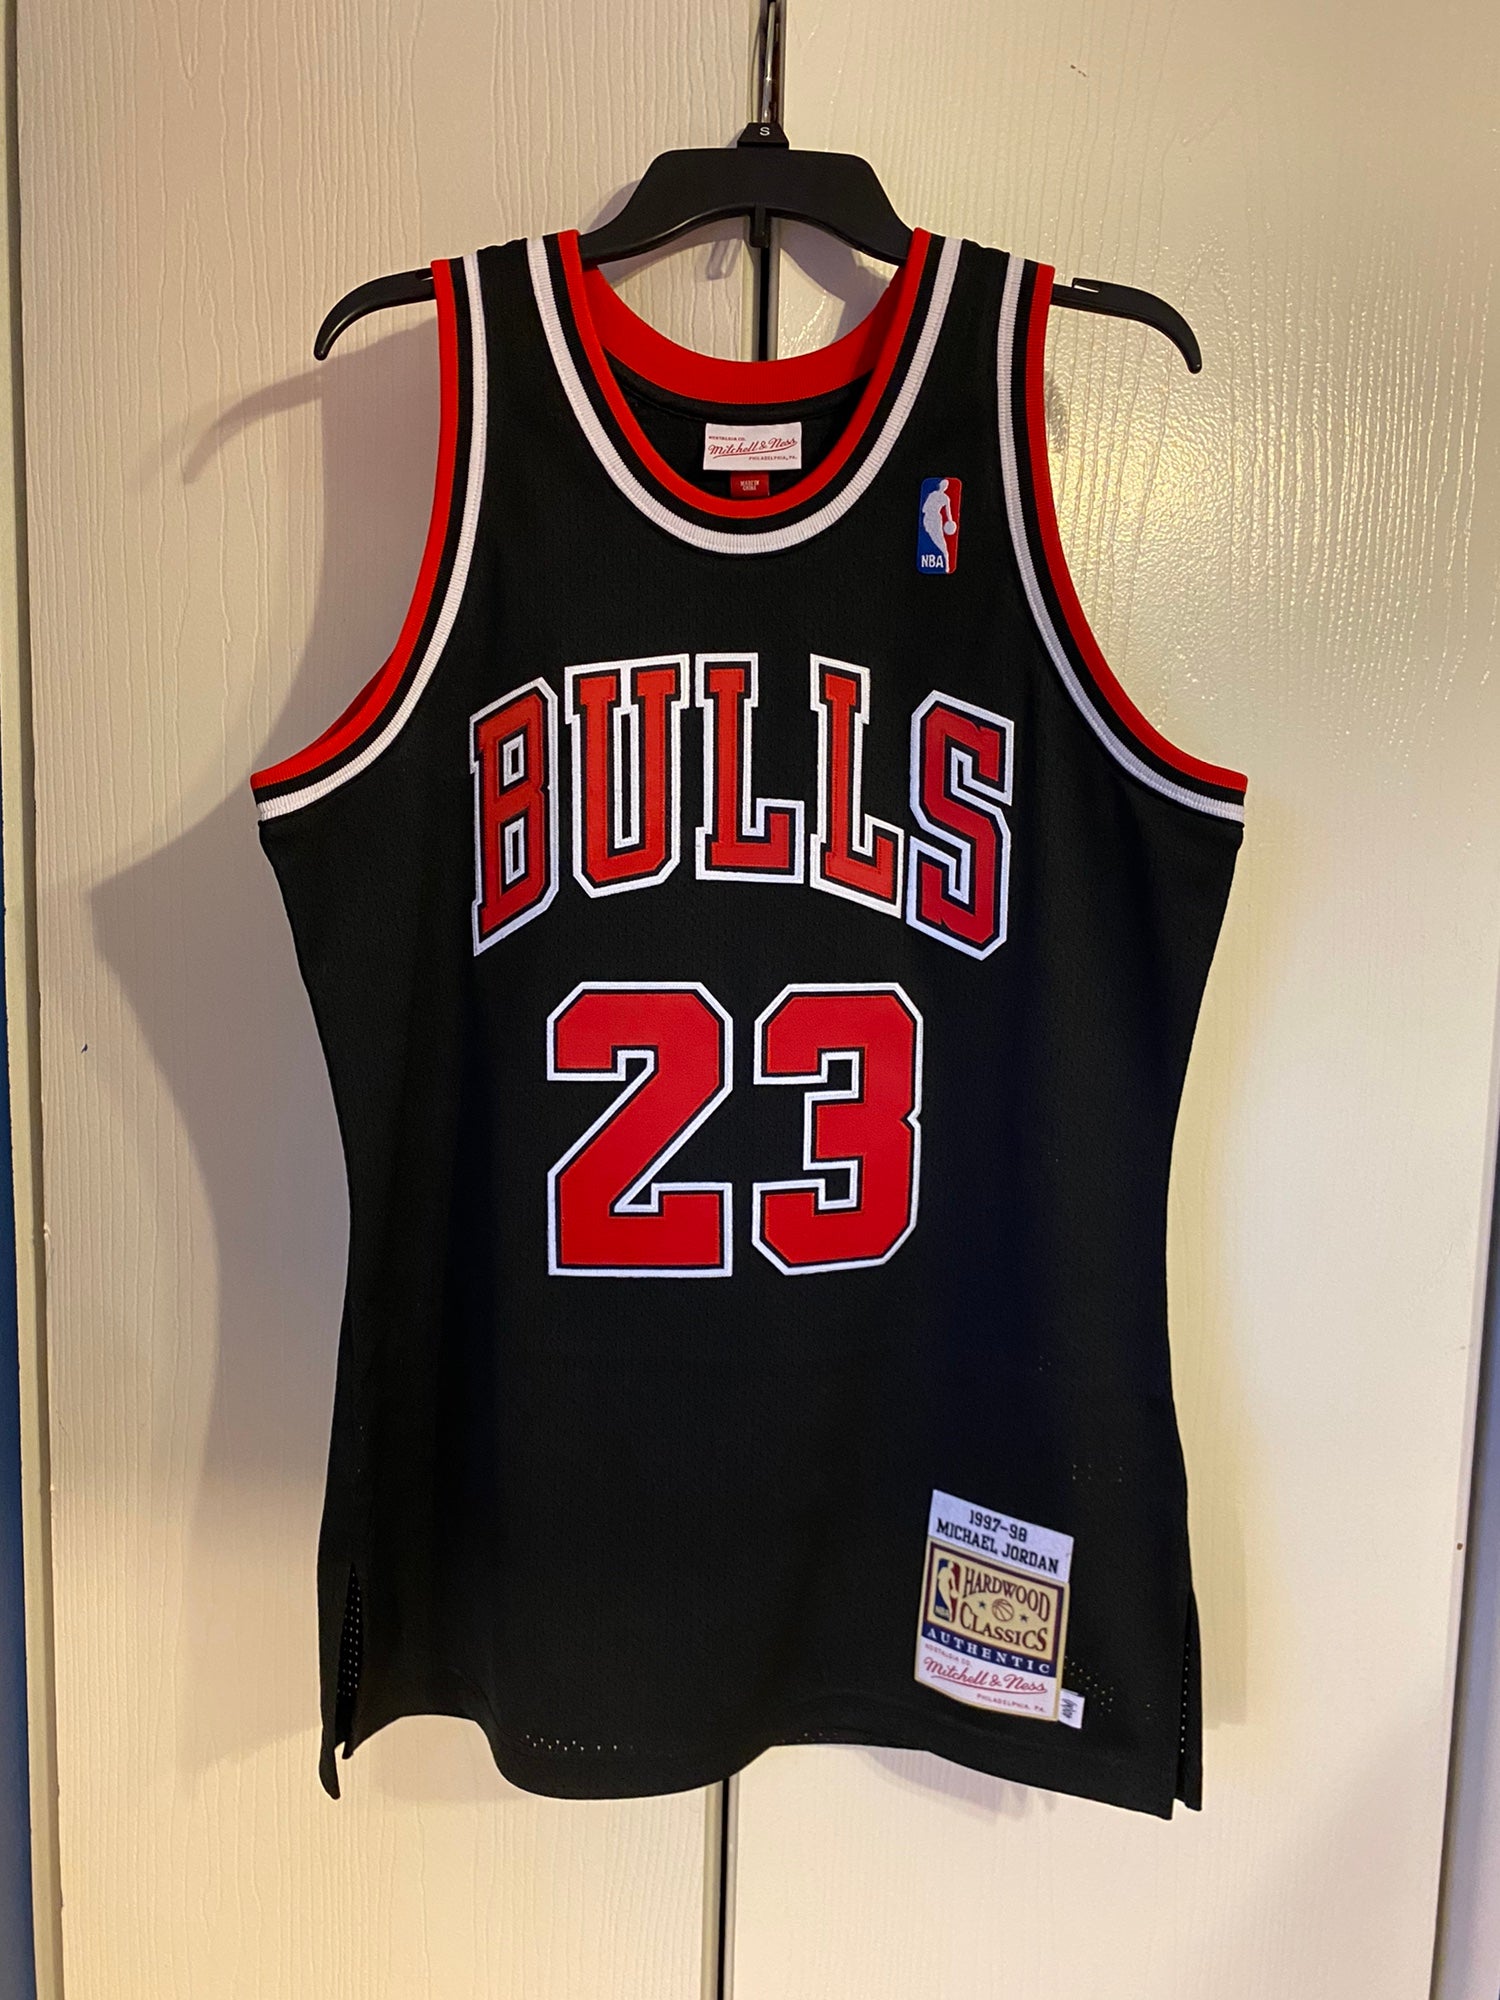 Michael Jordan Nike Authentic From 1998 Vs. Mitchell & Ness 97-98 Jersey 